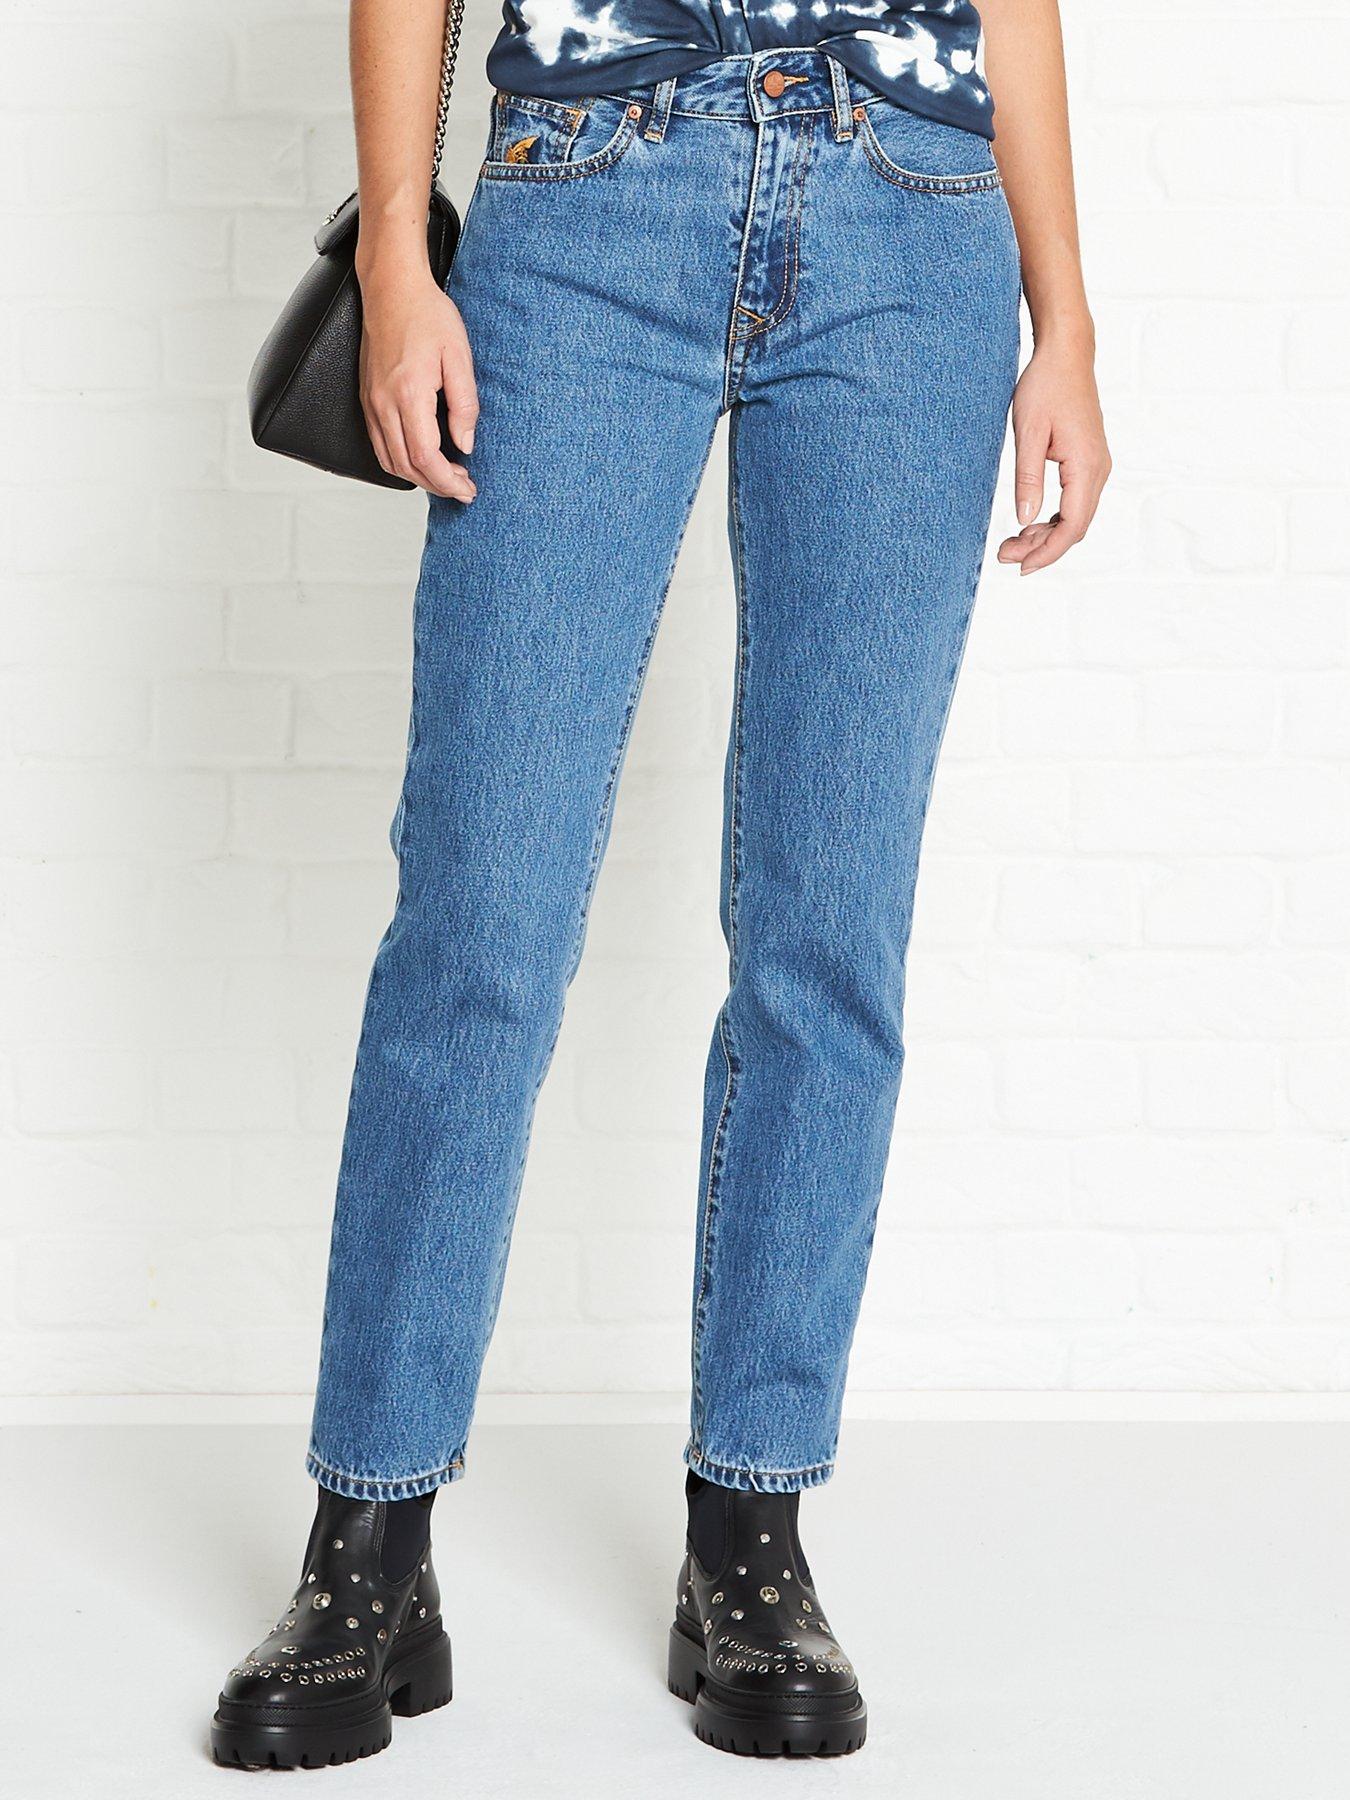 vivienne westwood anglomania jeans